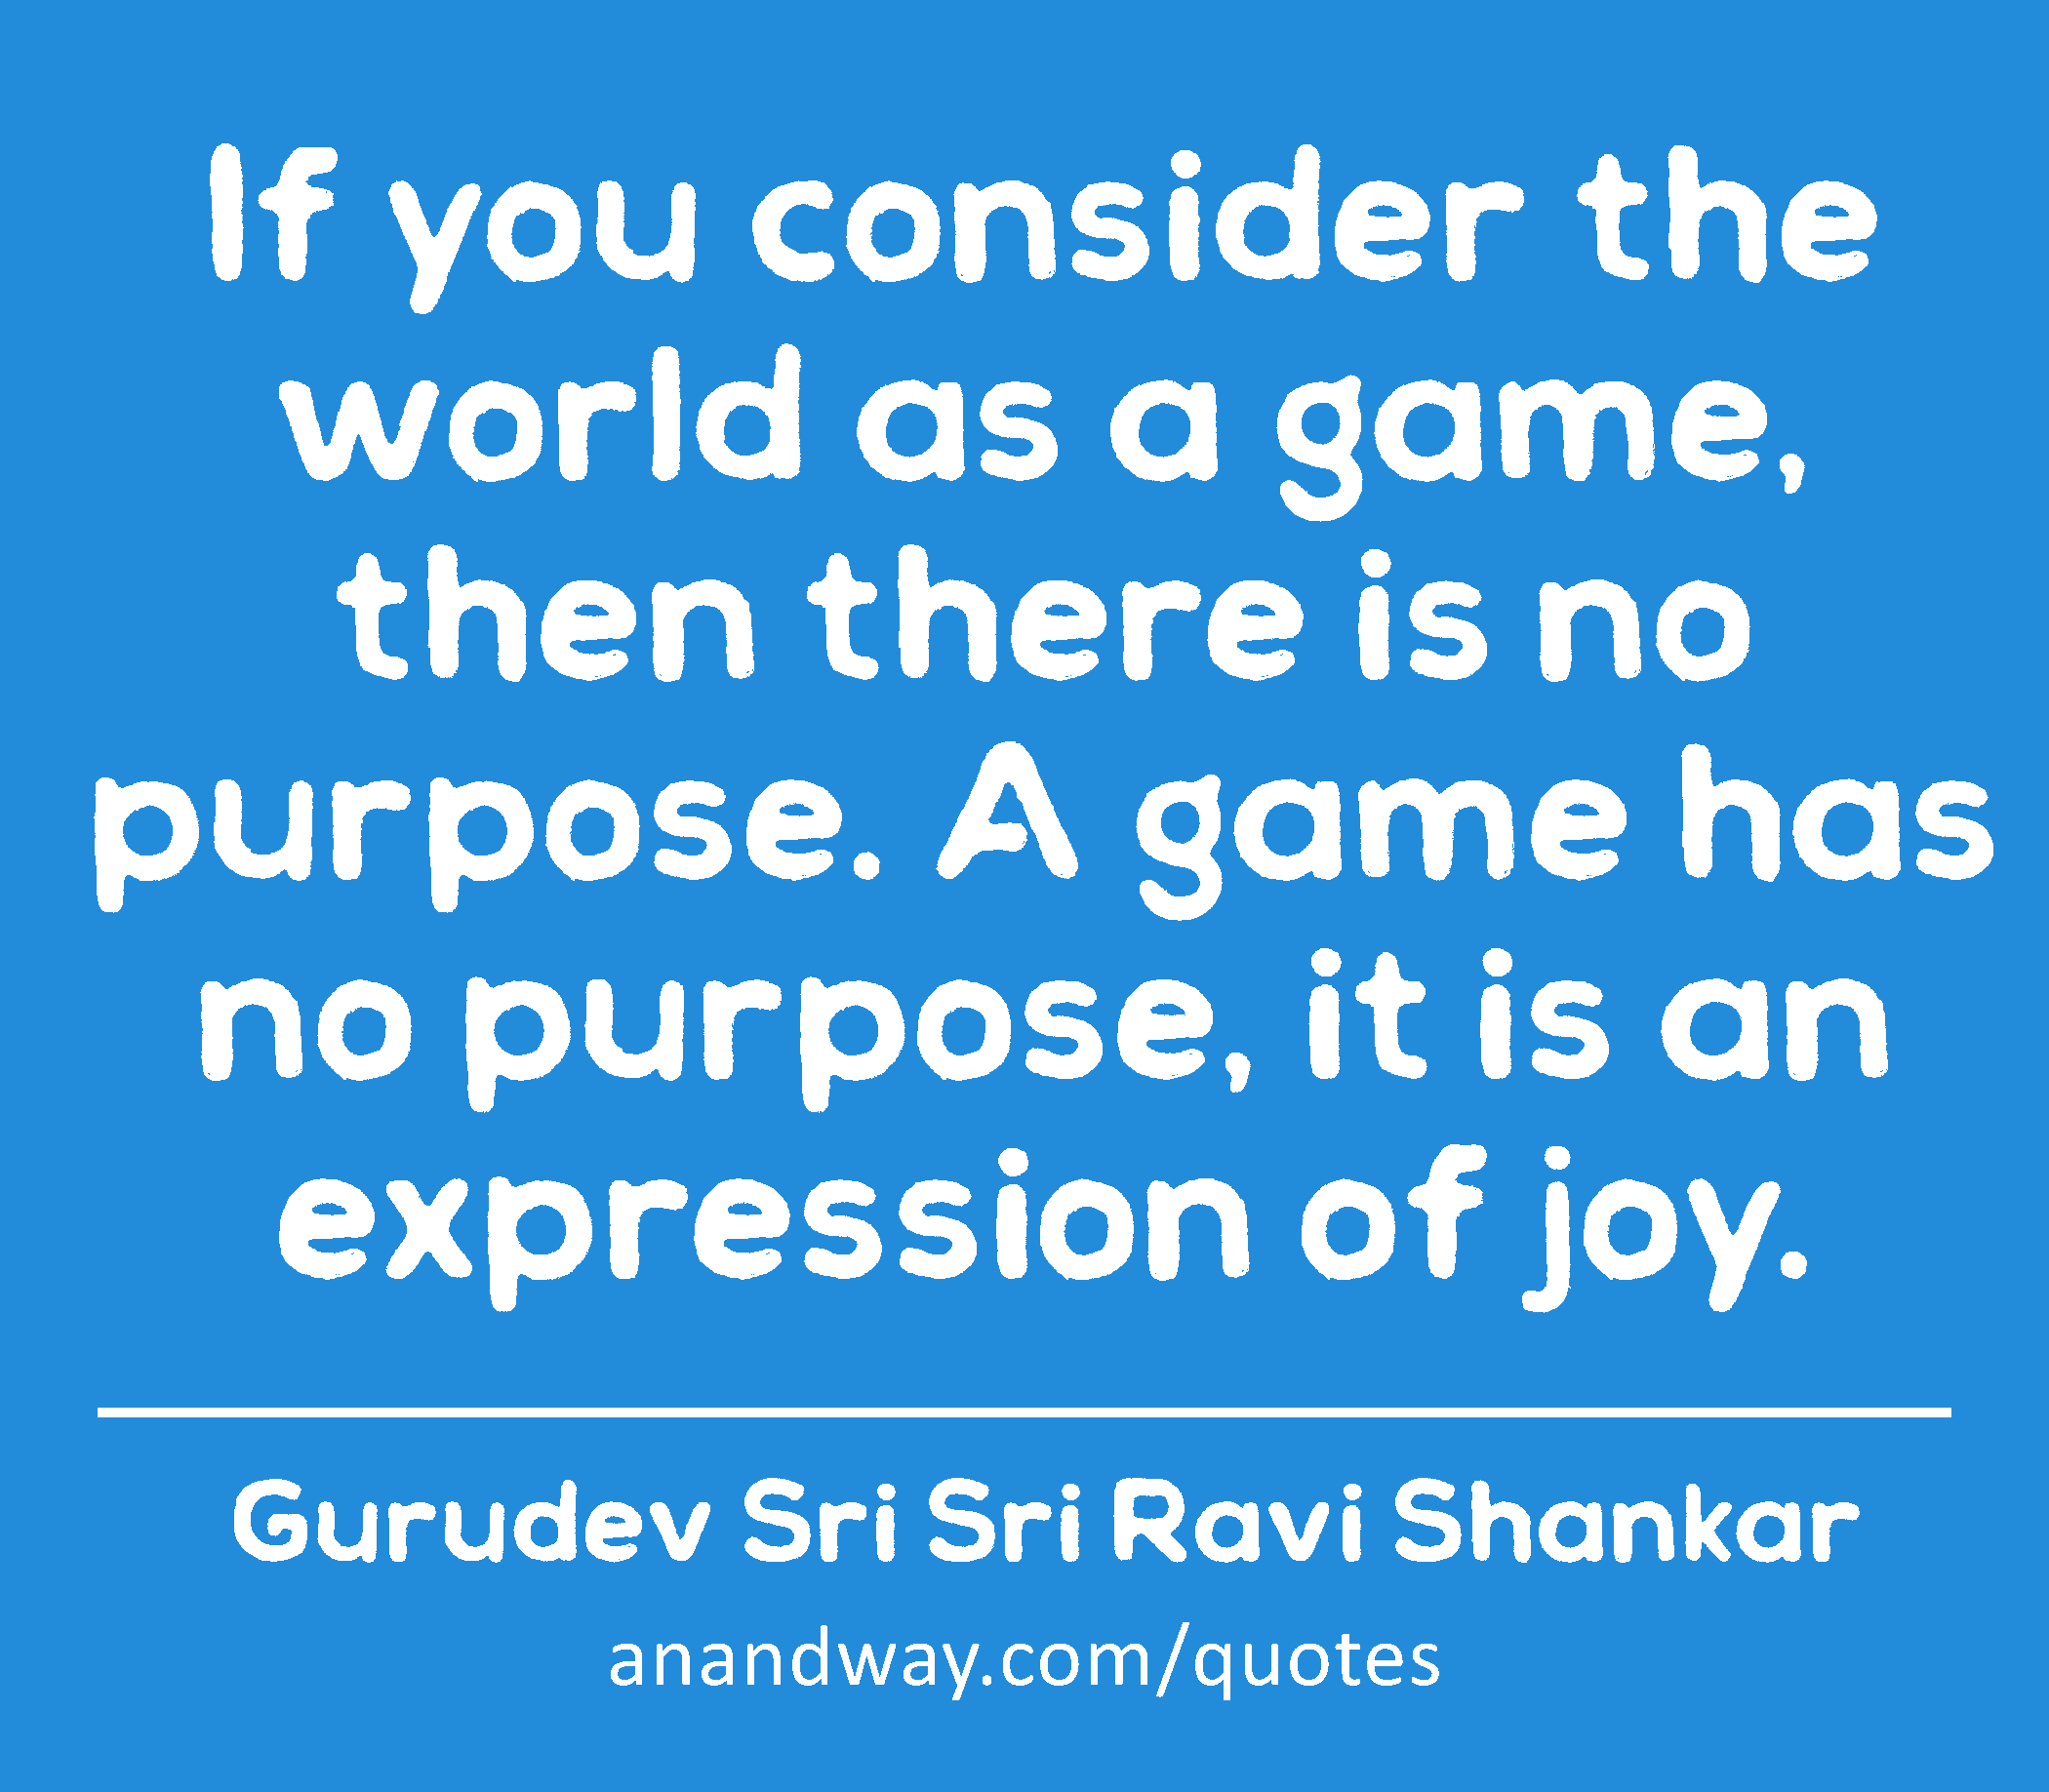 If you consider the world as a game, then there is no purpose. A game has no purpose, it is an
 -Gurudev Sri Sri Ravi Shankar